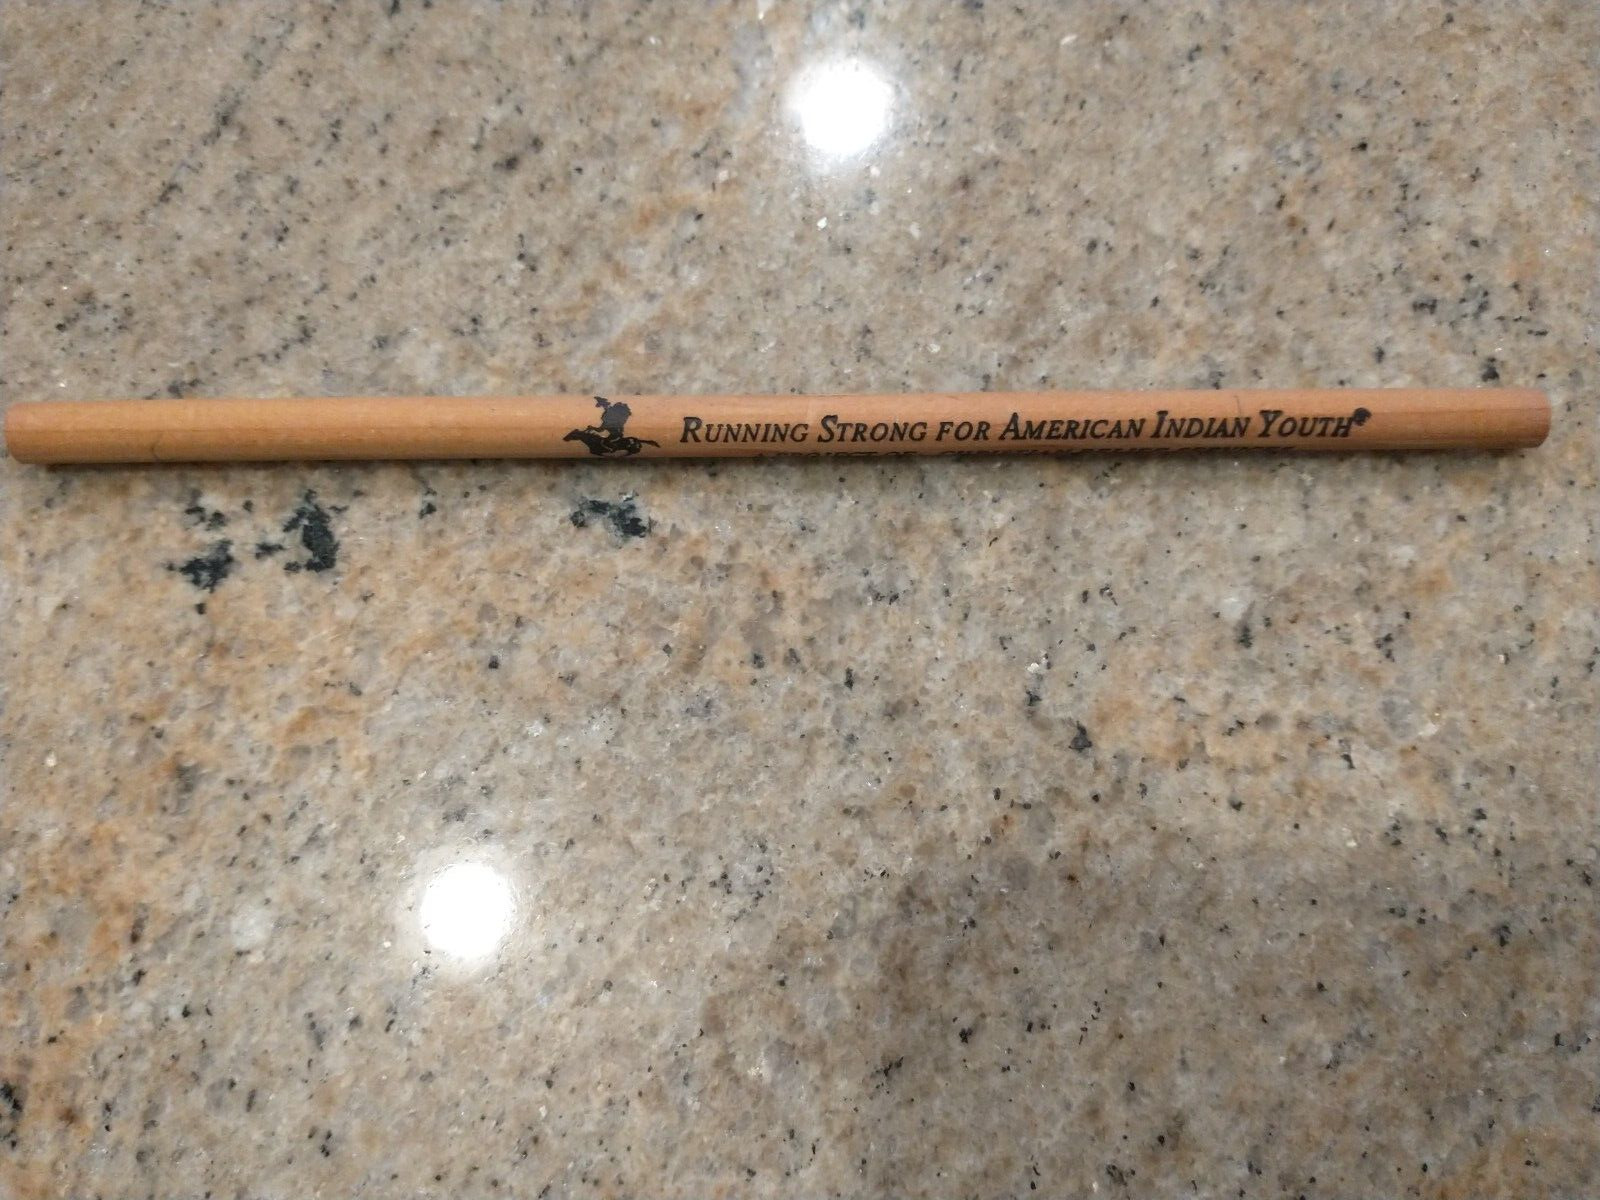 Vintage Unused Pencil Running Strong for American Indian Youth Christian Relief